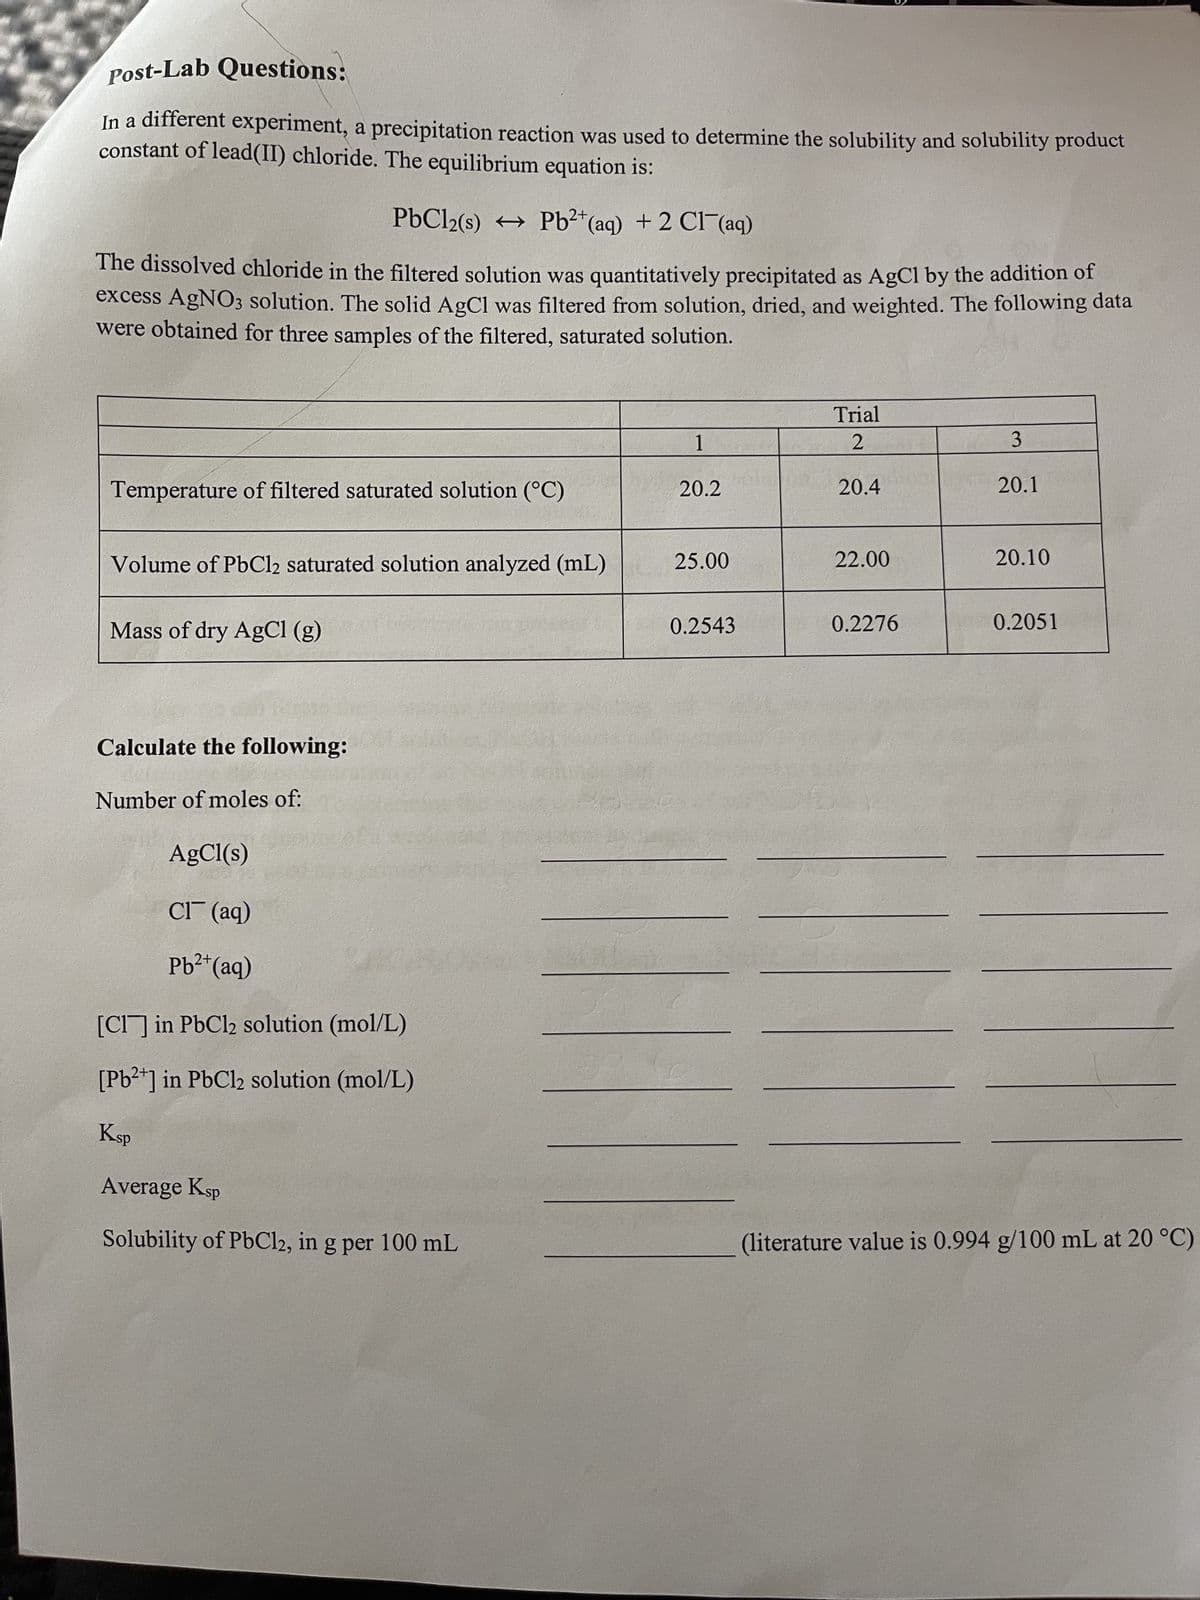 Post-Lab Questions:
In a different experiment, a precipitation reaction was used to determine the solubility and solubility product
constant of lead(II) chloride. The equilibrium equation is:
PbCl2(s) → Pb2+ (aq) + 2 Cl(aq)
The dissolved chloride in the filtered solution was quantitatively precipitated as AgCl by the addition of
excess AgNO3 solution. The solid AgCl was filtered from solution, dried, and weighted. The following data
were obtained for three samples of the filtered, saturated solution.
Temperature of filtered saturated solution (°C)
Volume of PbCl2 saturated solution analyzed (mL)
Mass of dry AgCl (g)
Calculate the following:
Number of moles of:
AgCl(s)
2021
Cl(aq)
2+
Pb²+ (aq)
[Cl] in PbCl2 solution (mol/L)
[Pb²+] in PbCl2 solution (mol/L)
Ksp
Average Ksp
Solubility of PbCl2, in g per 100 mL
1
20.2
25.00
0.2543
Trial
2
20.4
22.00
0.2276
3
20.1
20.10
0.2051
(literature value is 0.994 g/100 mL at 20 °C)